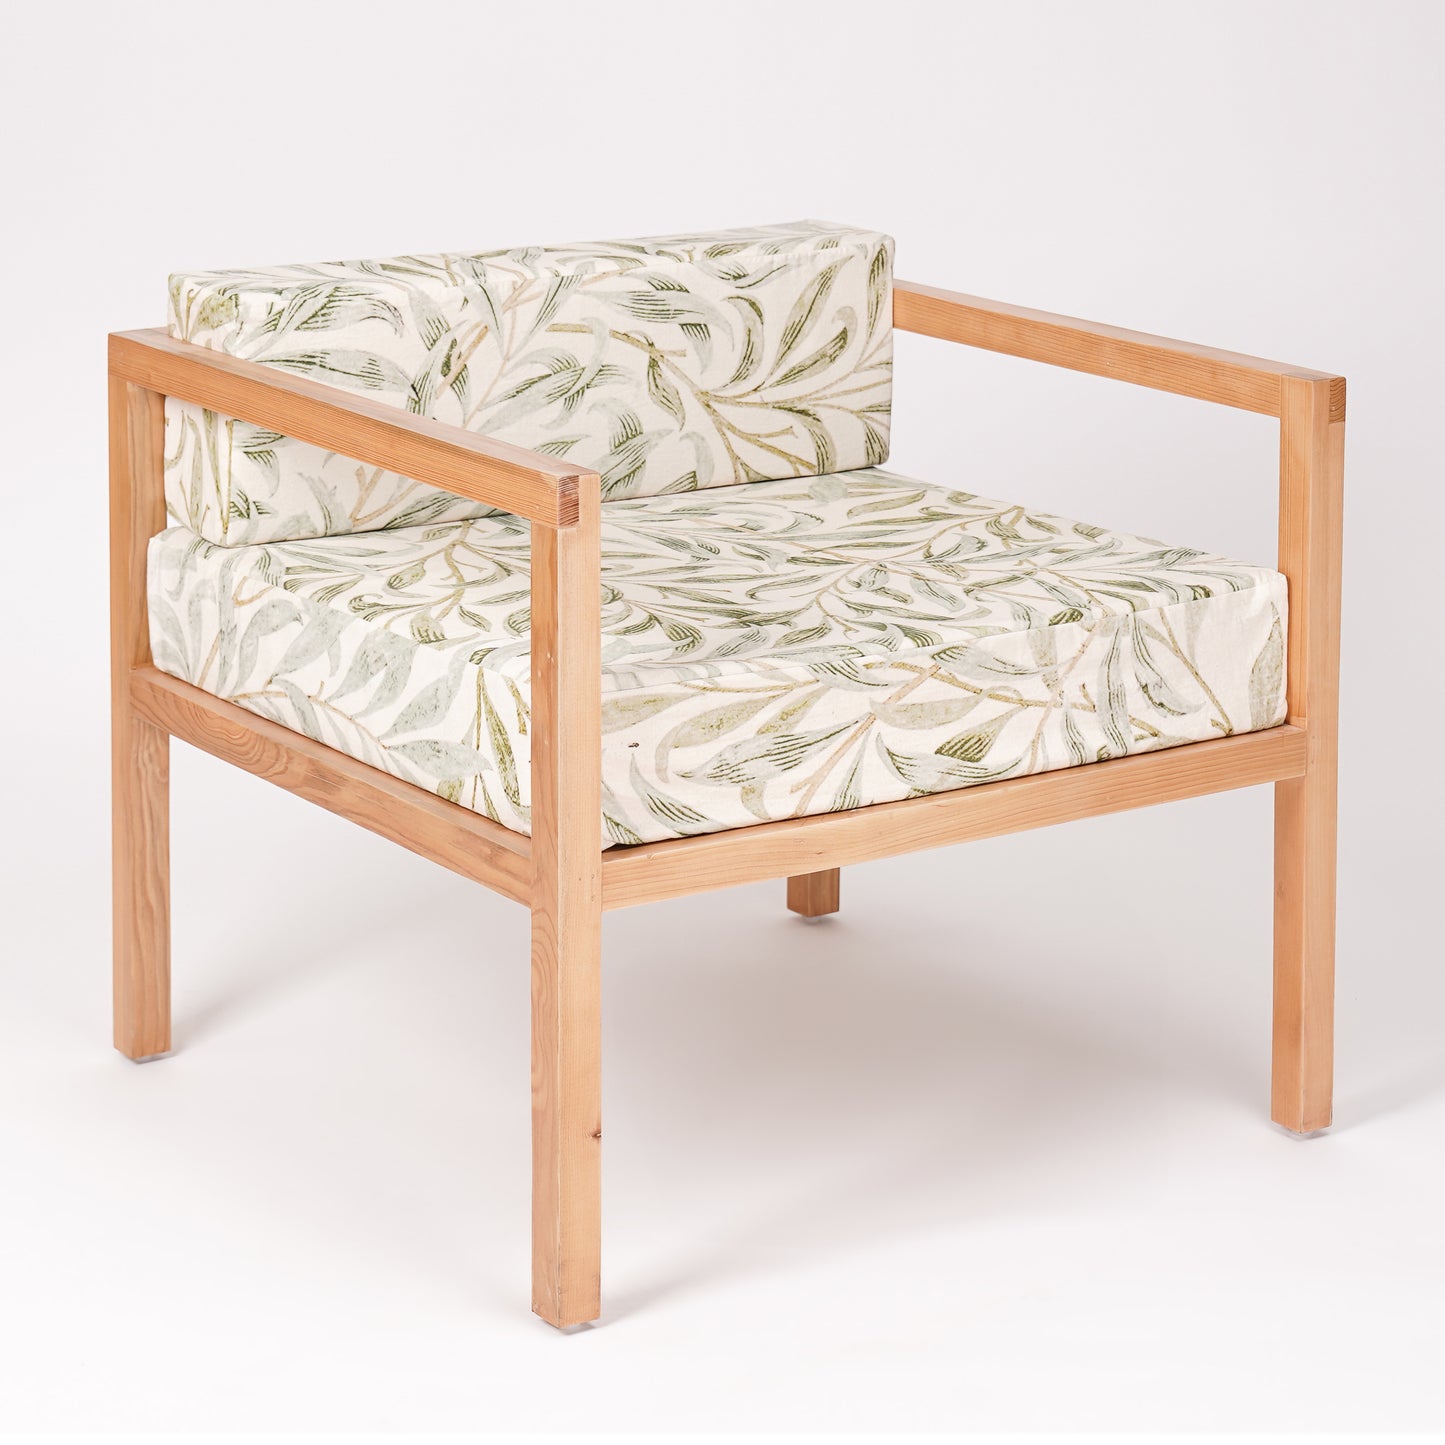 Unwind in style with our bespoke pine wood lounge chairs